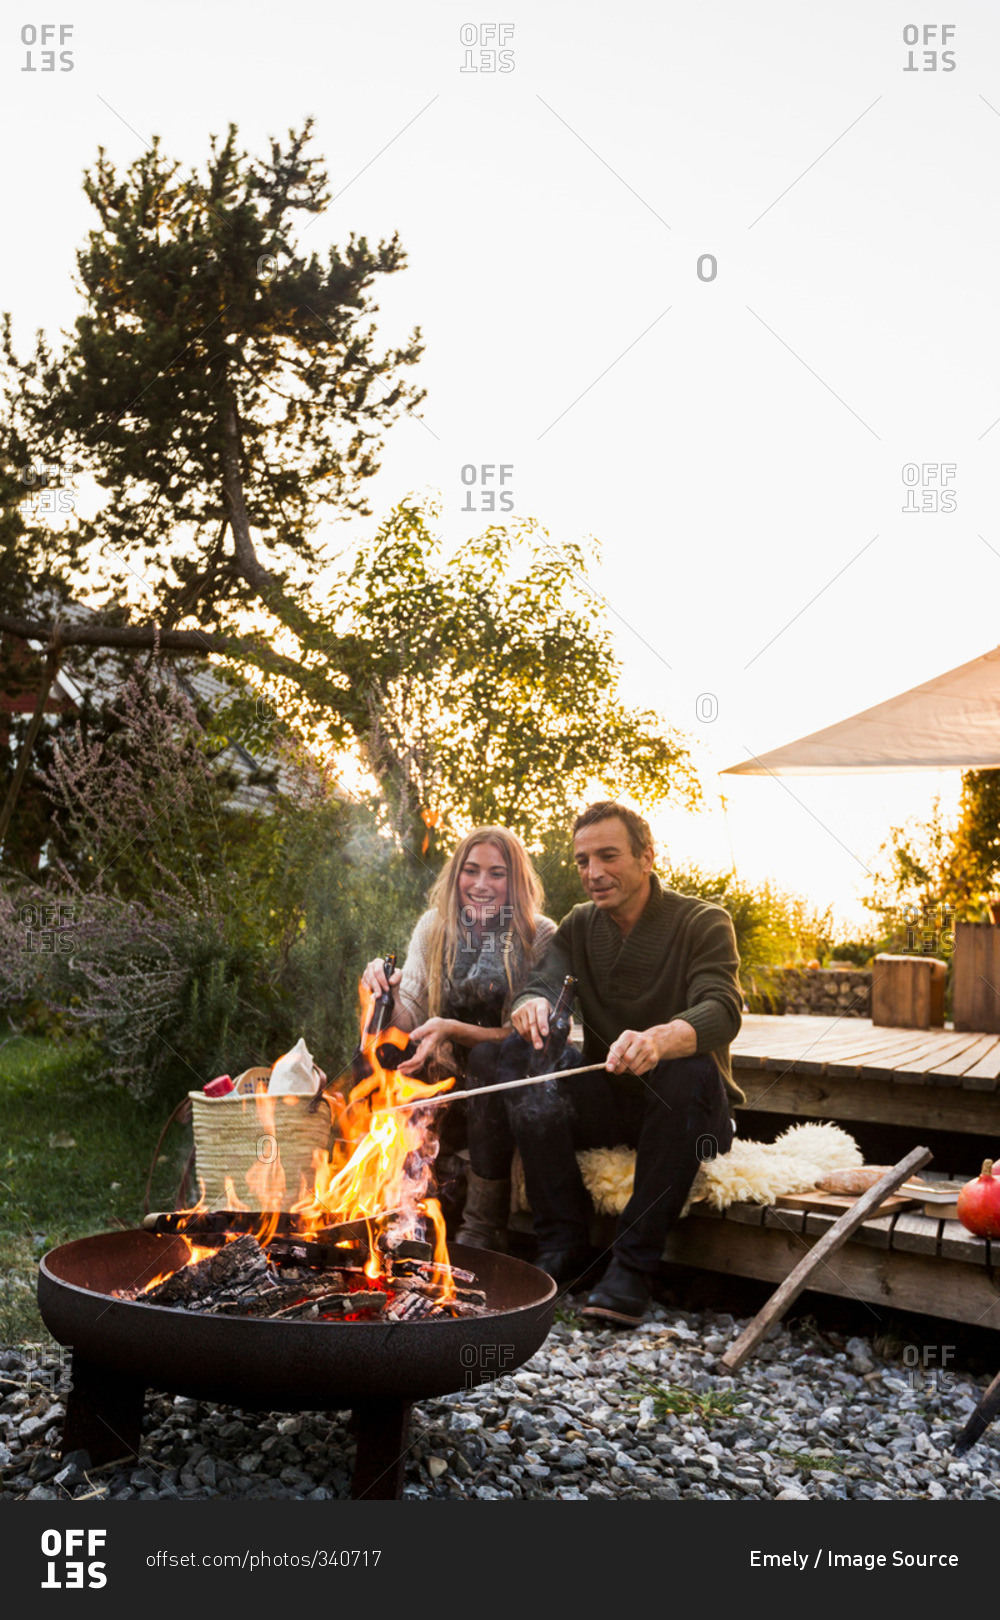 Couple sitting by fire pit in garden